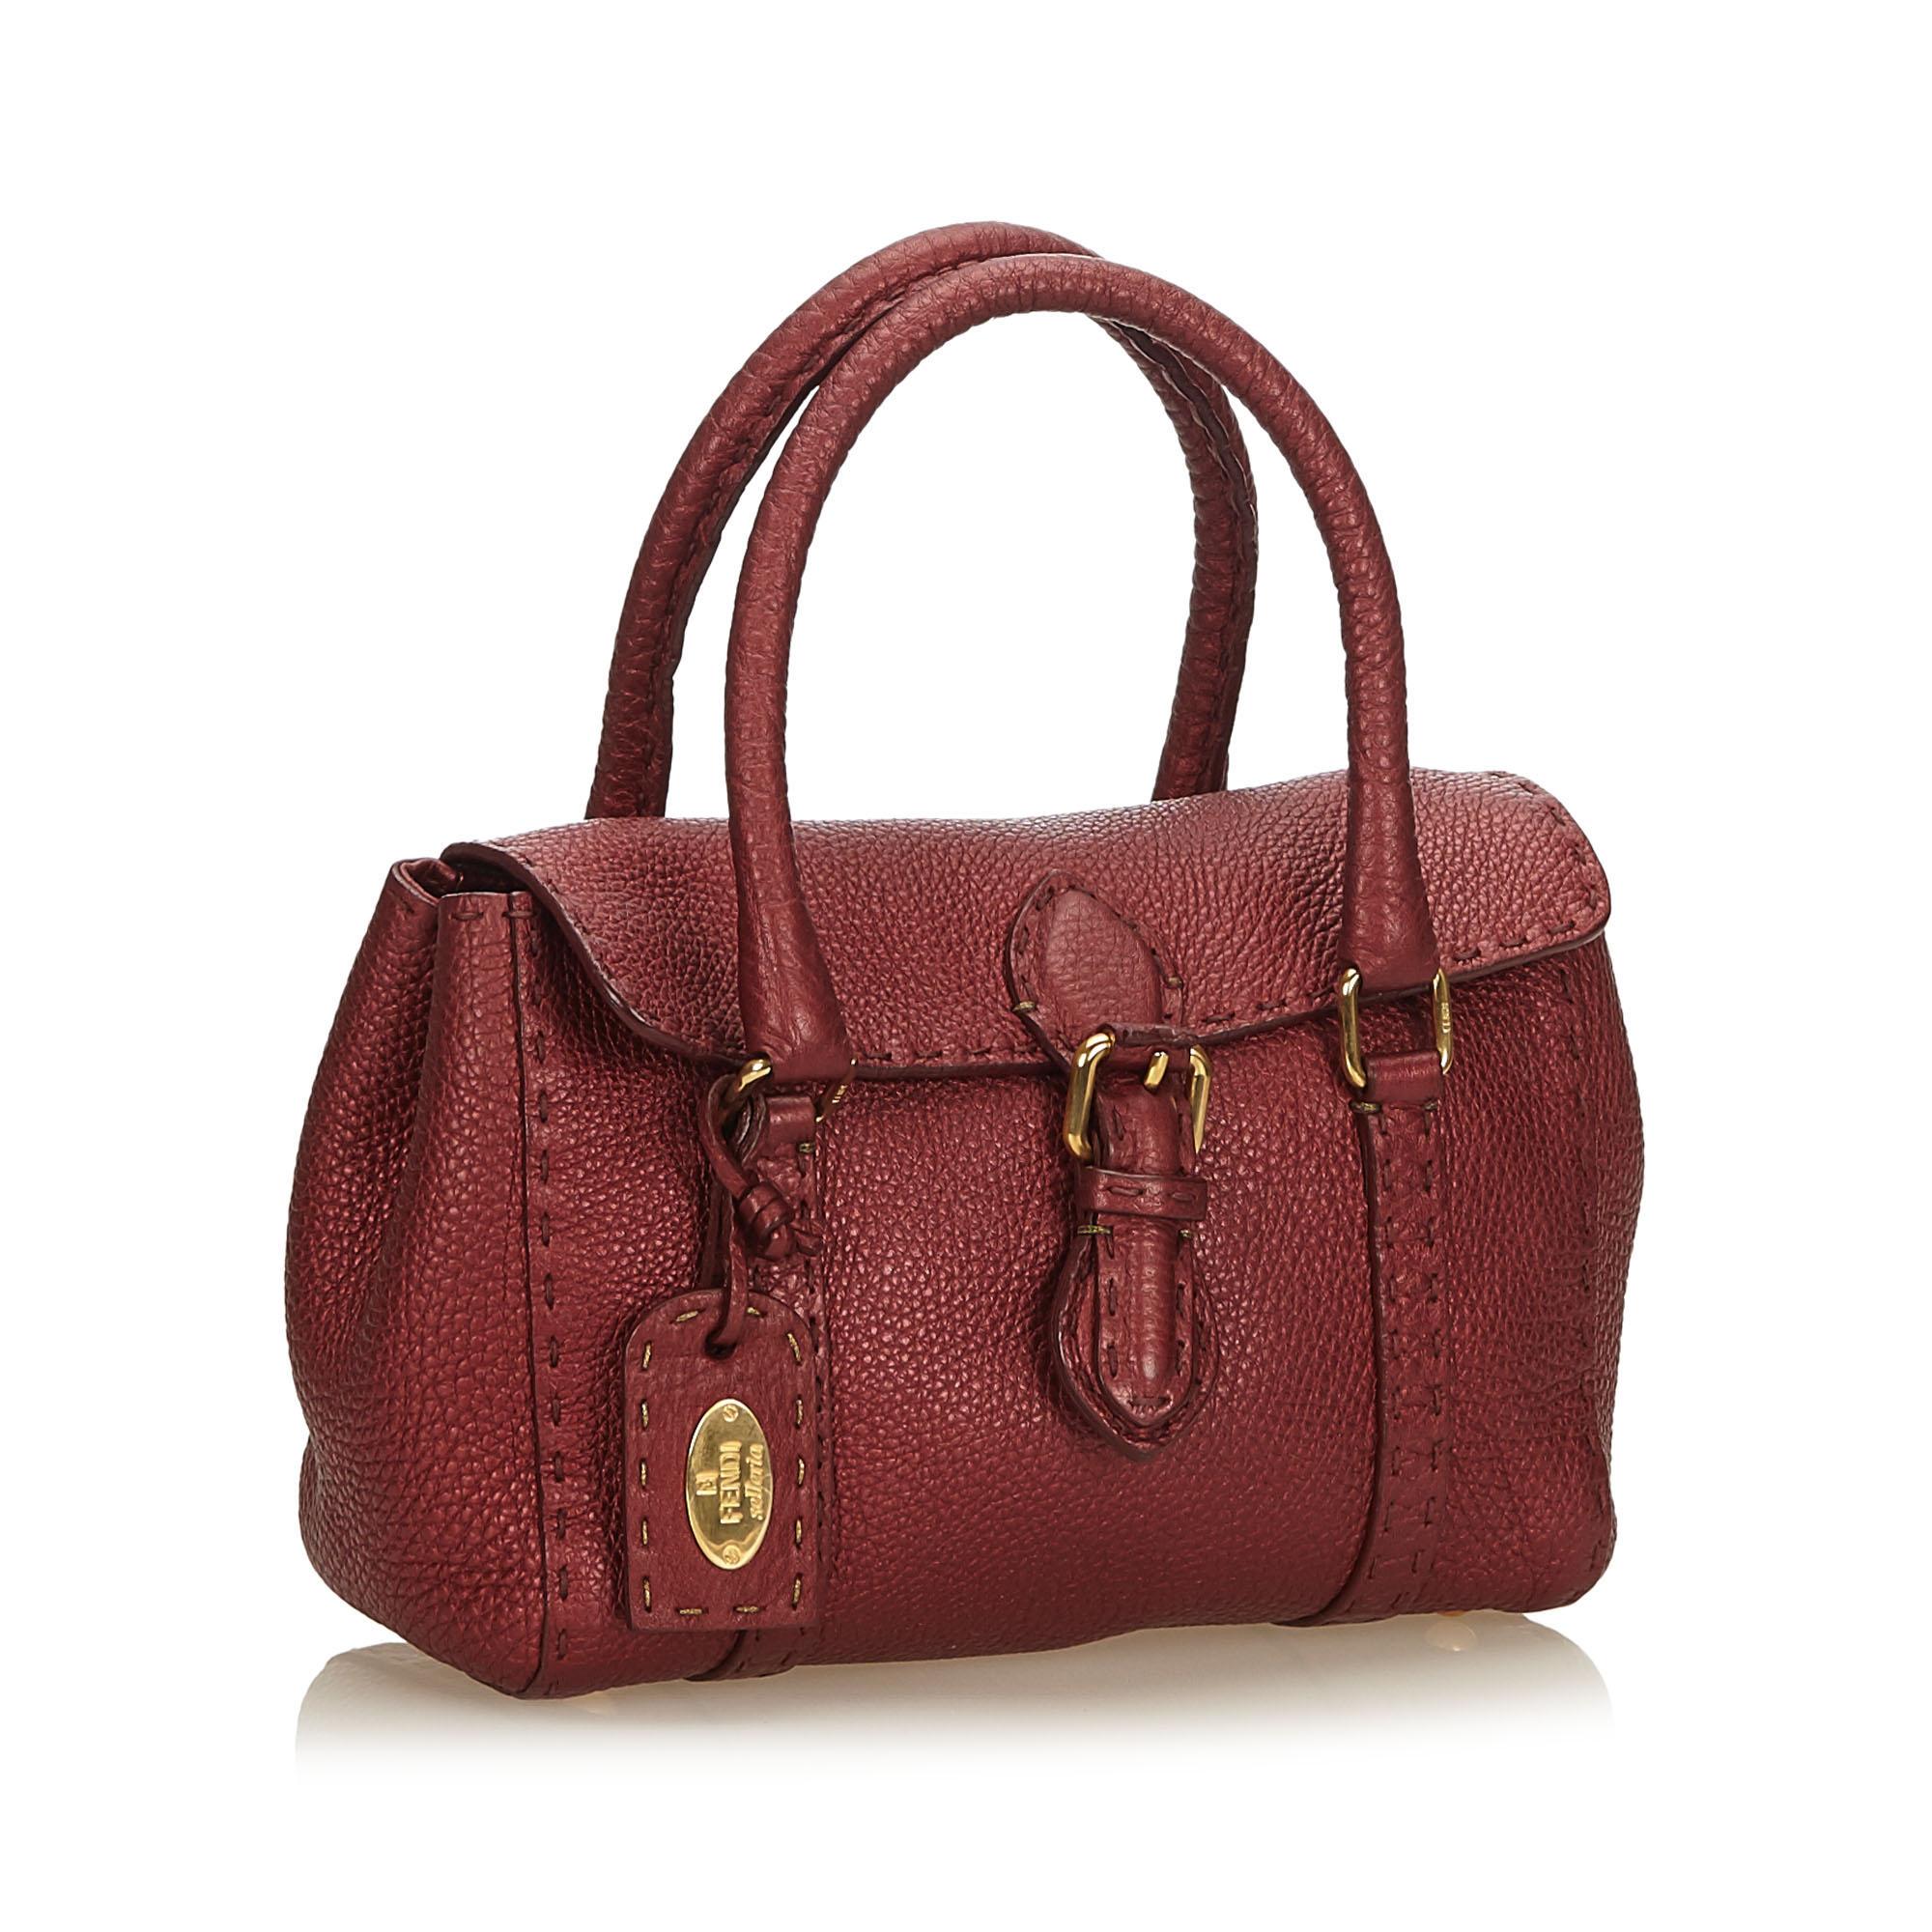 The Mini Linda features a leather body, rolled leather handles, top flap with buckle closure, and an interior zip pocket.

It carries a A condition rating.

Dimensions: 
Length 15.00 cm
Width 26.00 cm
Depth 13.00 cm
Hand Drop 11.00 cm

Inclusions: